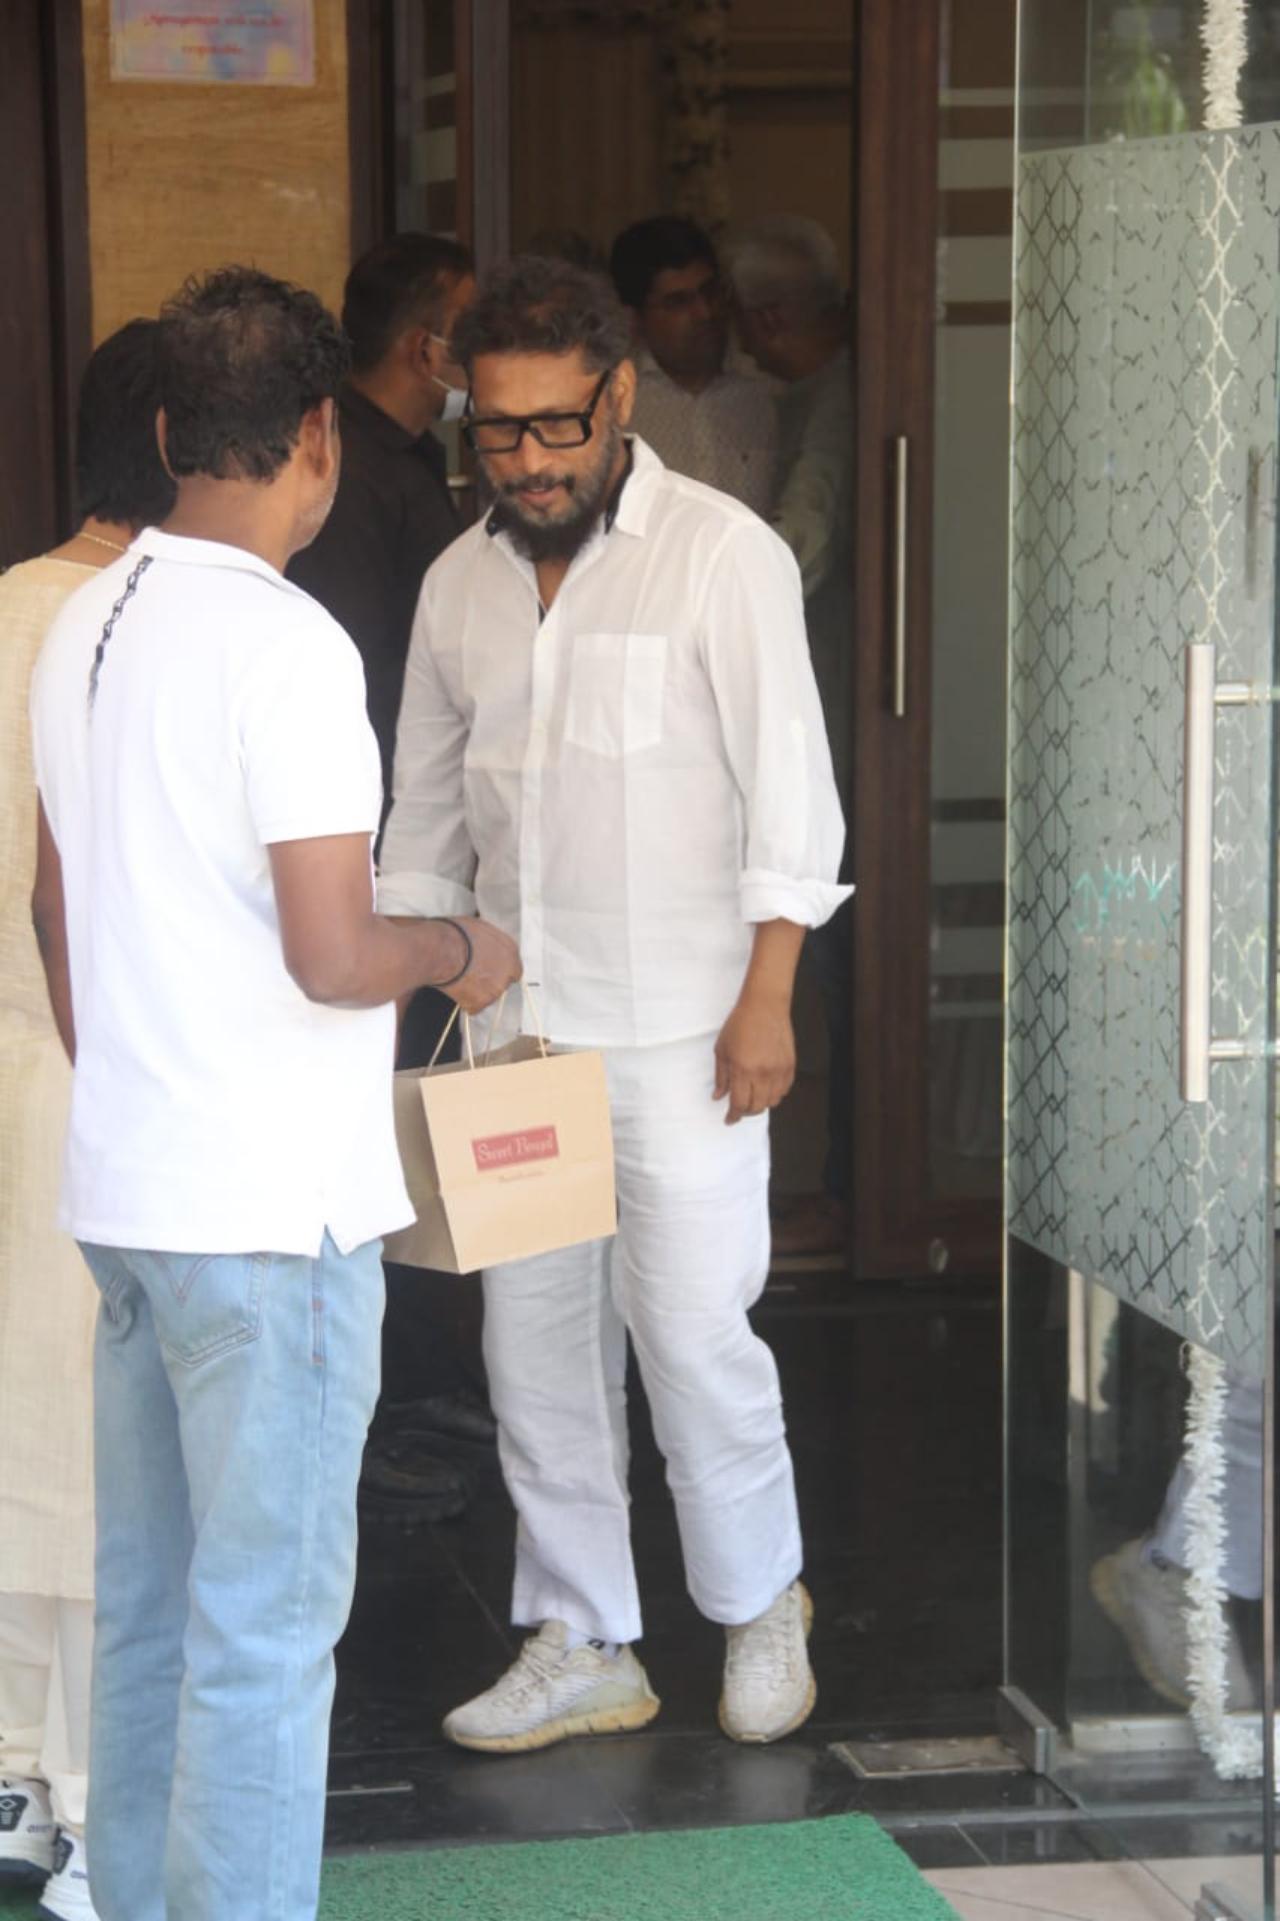 Director and producer Shoojit Sircar, famously known for films like 'Piku' and 'Pink' was also seen at the prayer meet.
 